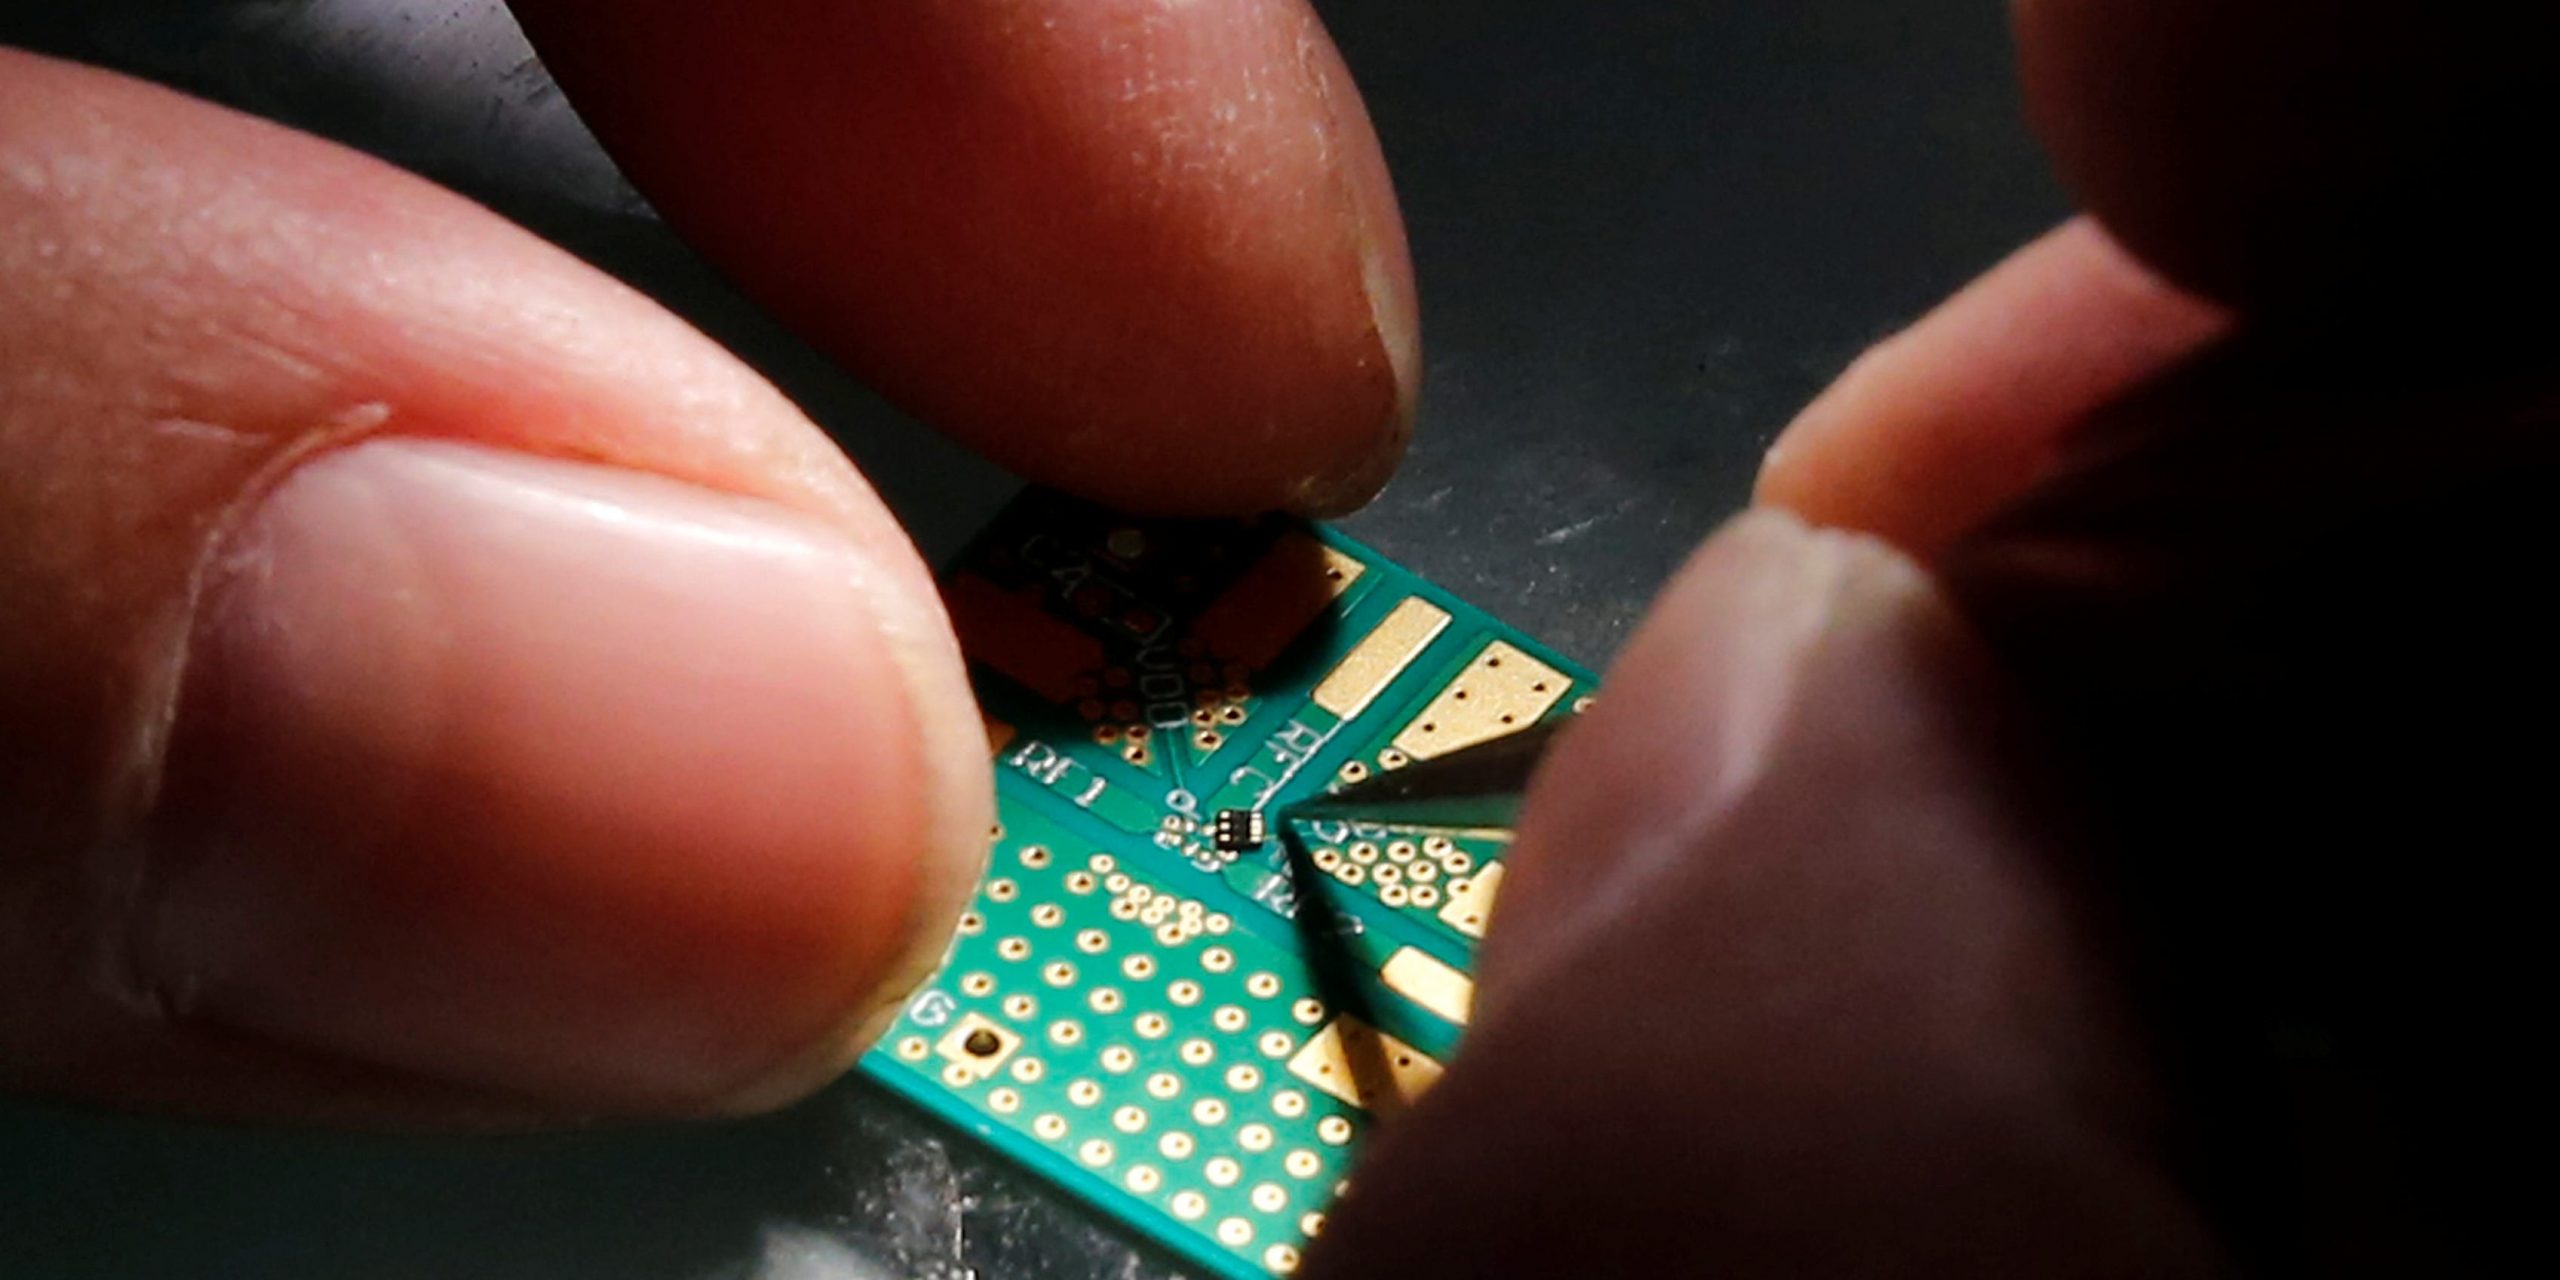 FILE PHOTO - A researcher plants a semiconductor on an interface board during a research work to design and develop a semiconductor product at Tsinghua Unigroup research centre in Beijing, China, February 29, 2016.  REUTERS/Kim Kyung-Hoon